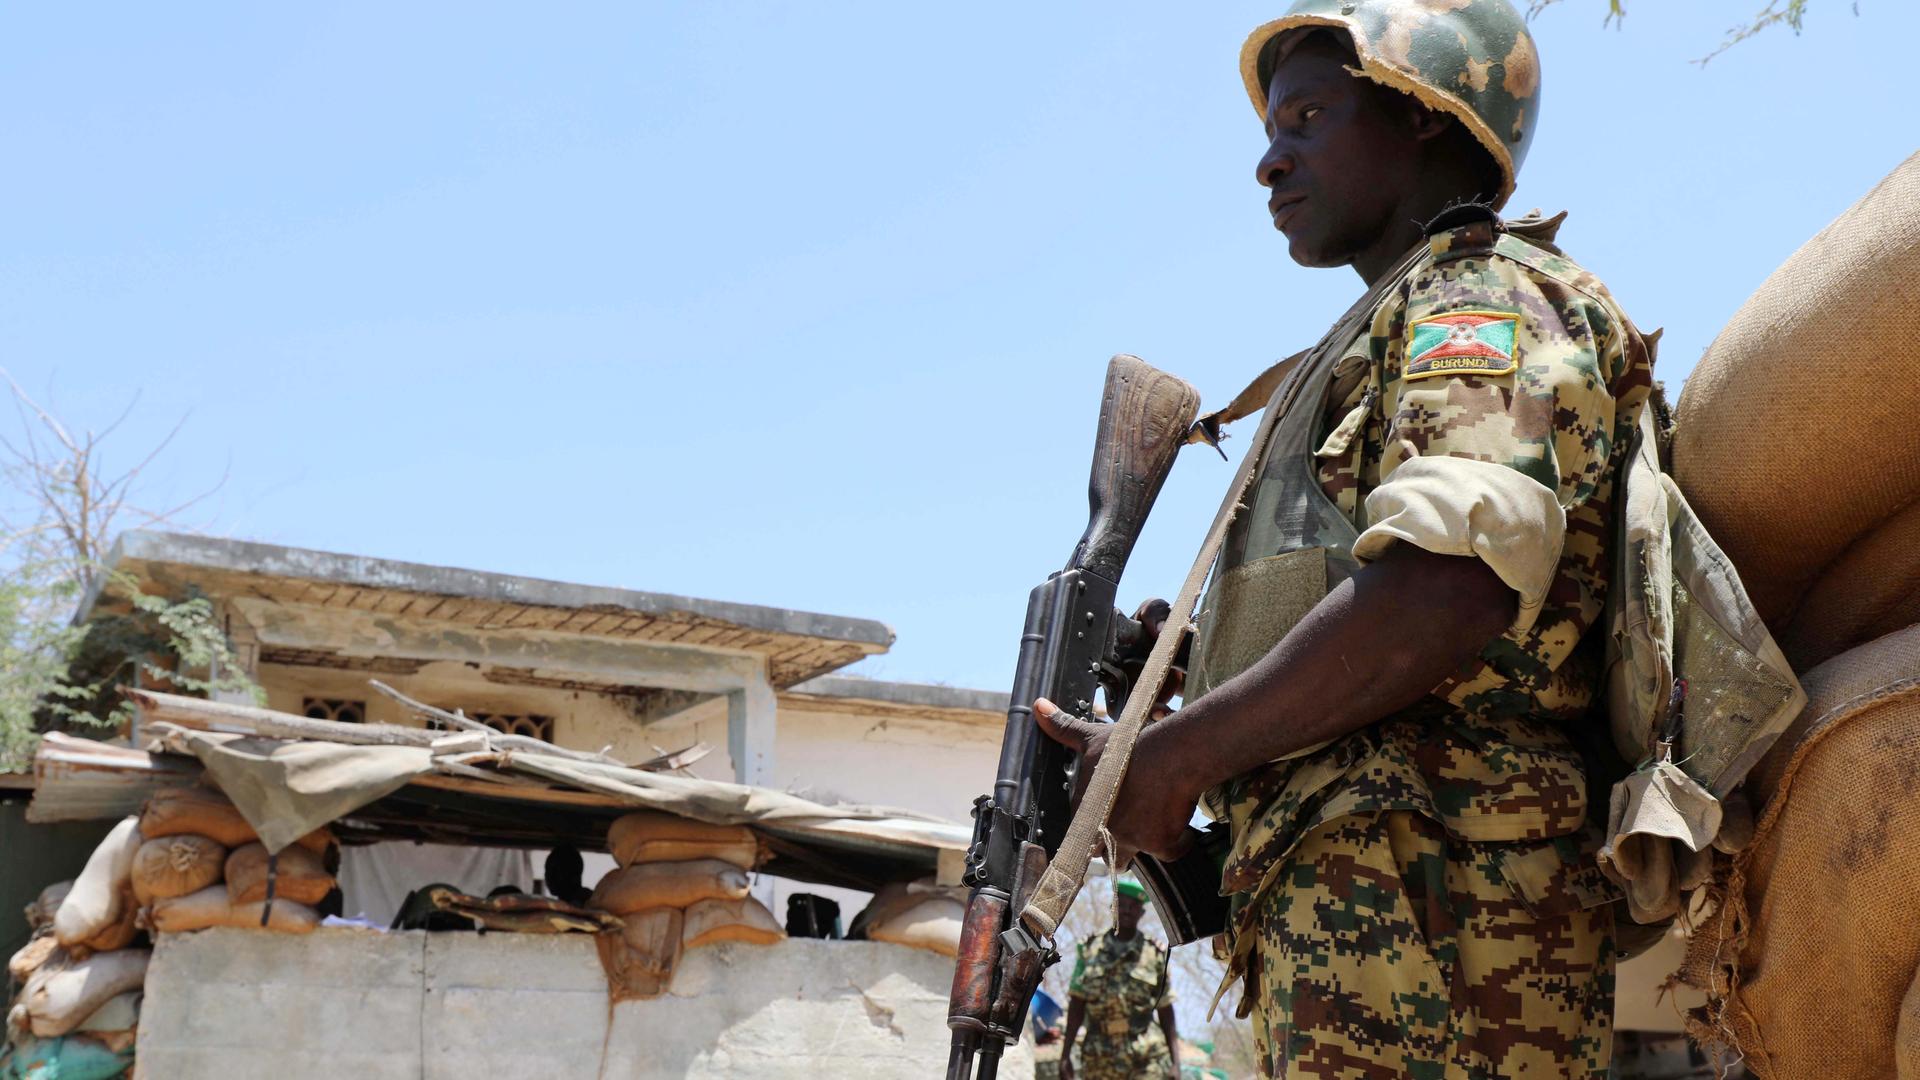 A Burundian African Union Mission in Somalia (AMISOM) peacekeeper stands guard before being replaced by the Somali military at Jaale Siad Military academy in Mogadishu, Somalia. February 28, 2019.